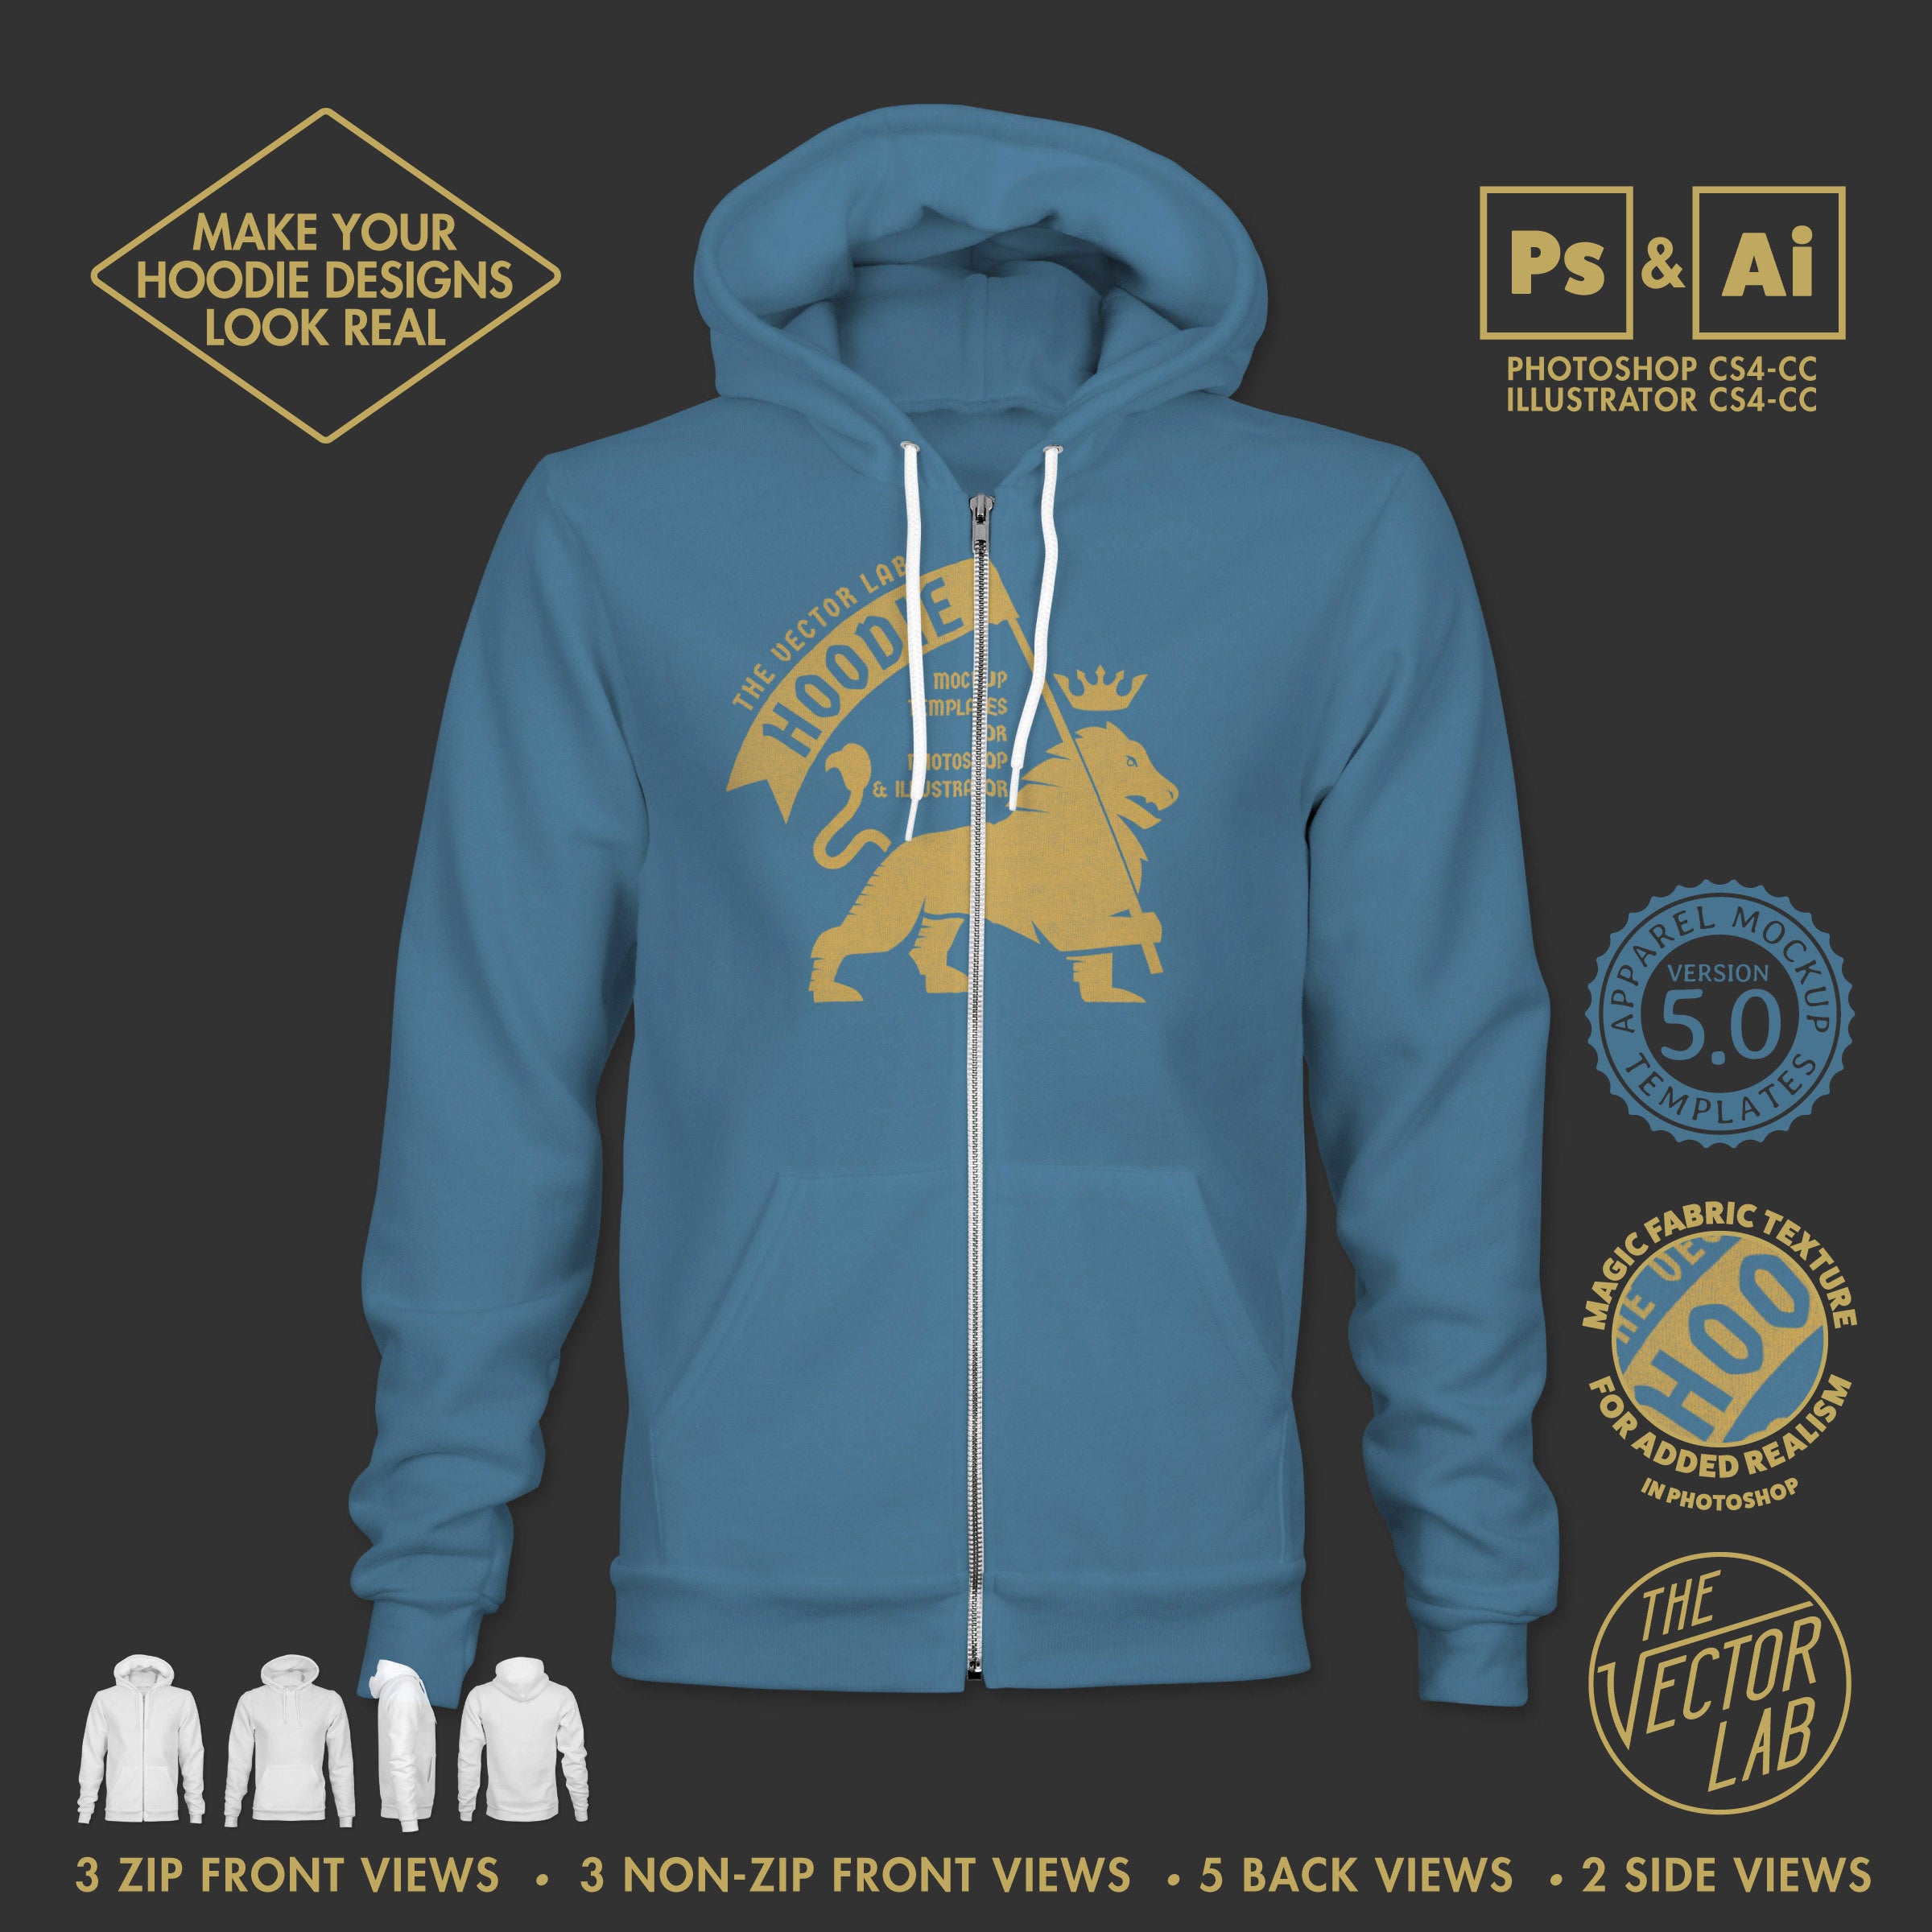 Download Men's Hoodie Mockup Templates - TheVectorLab